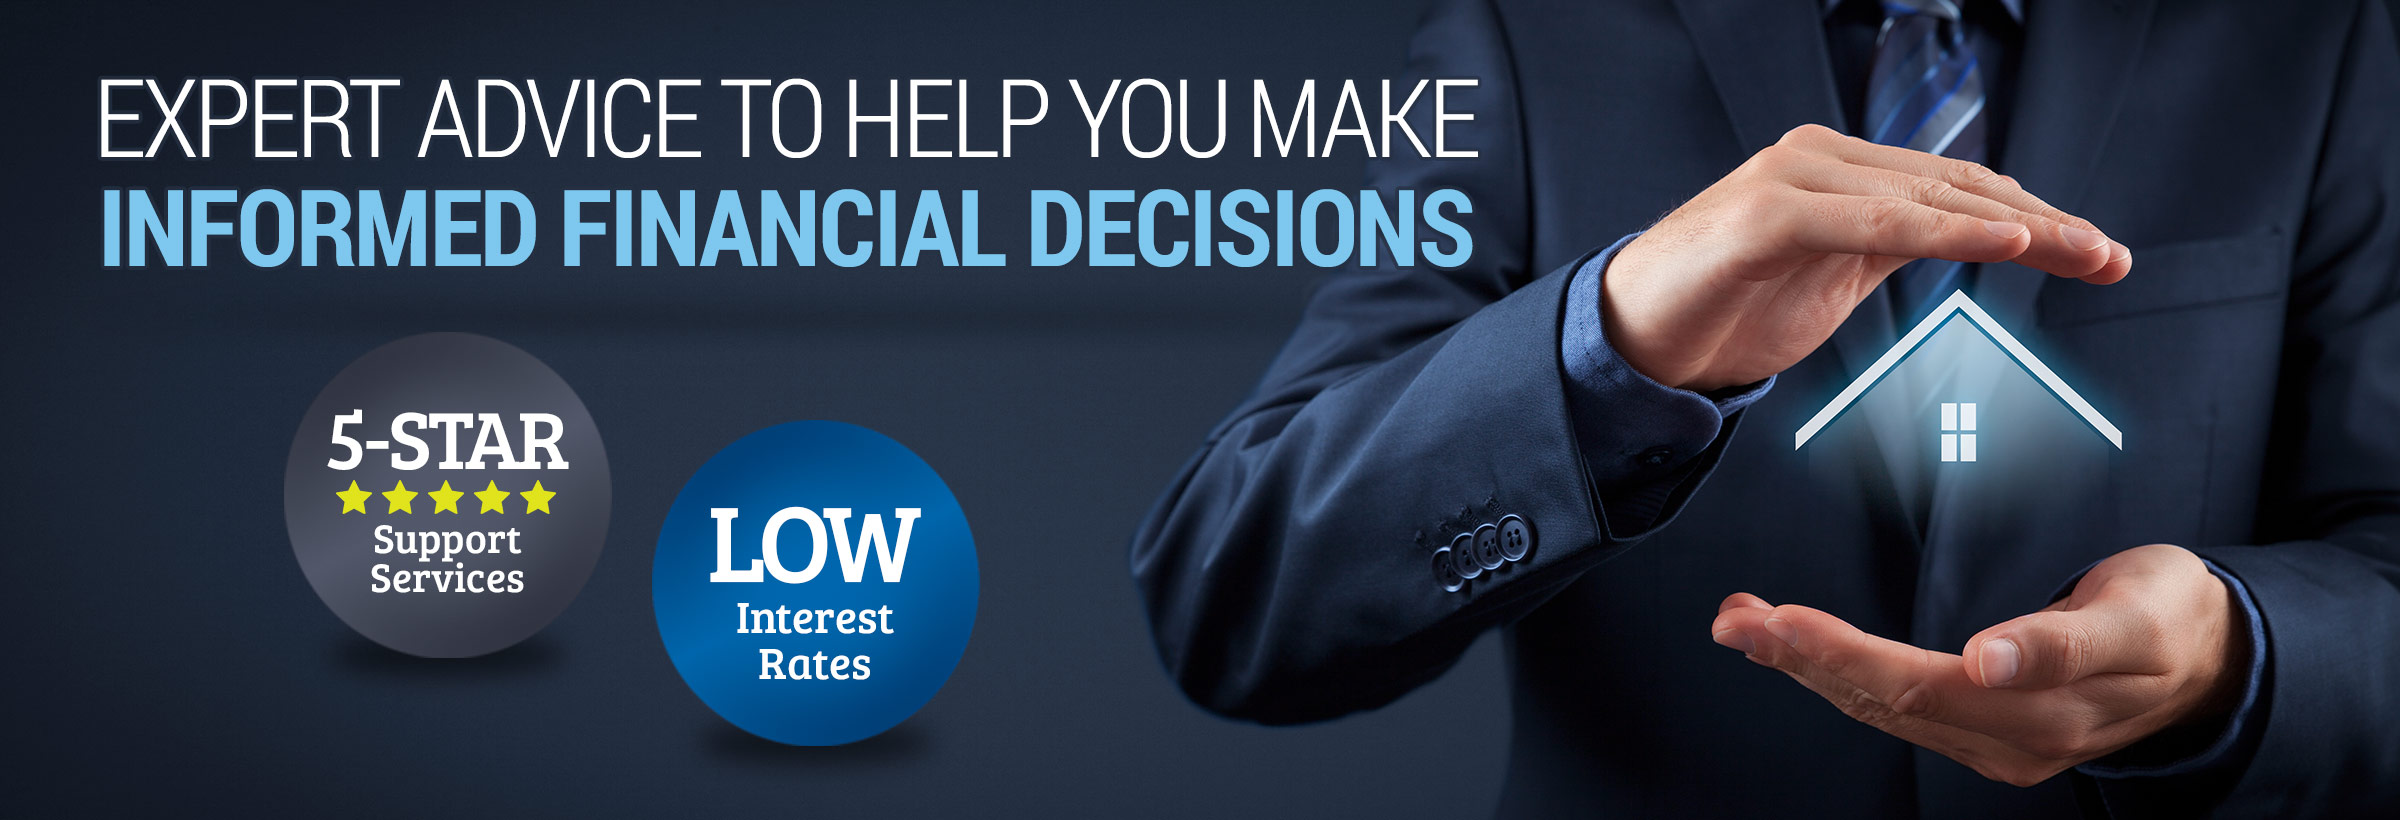 Expert Advice to Help You Make Informed Financial Decisions